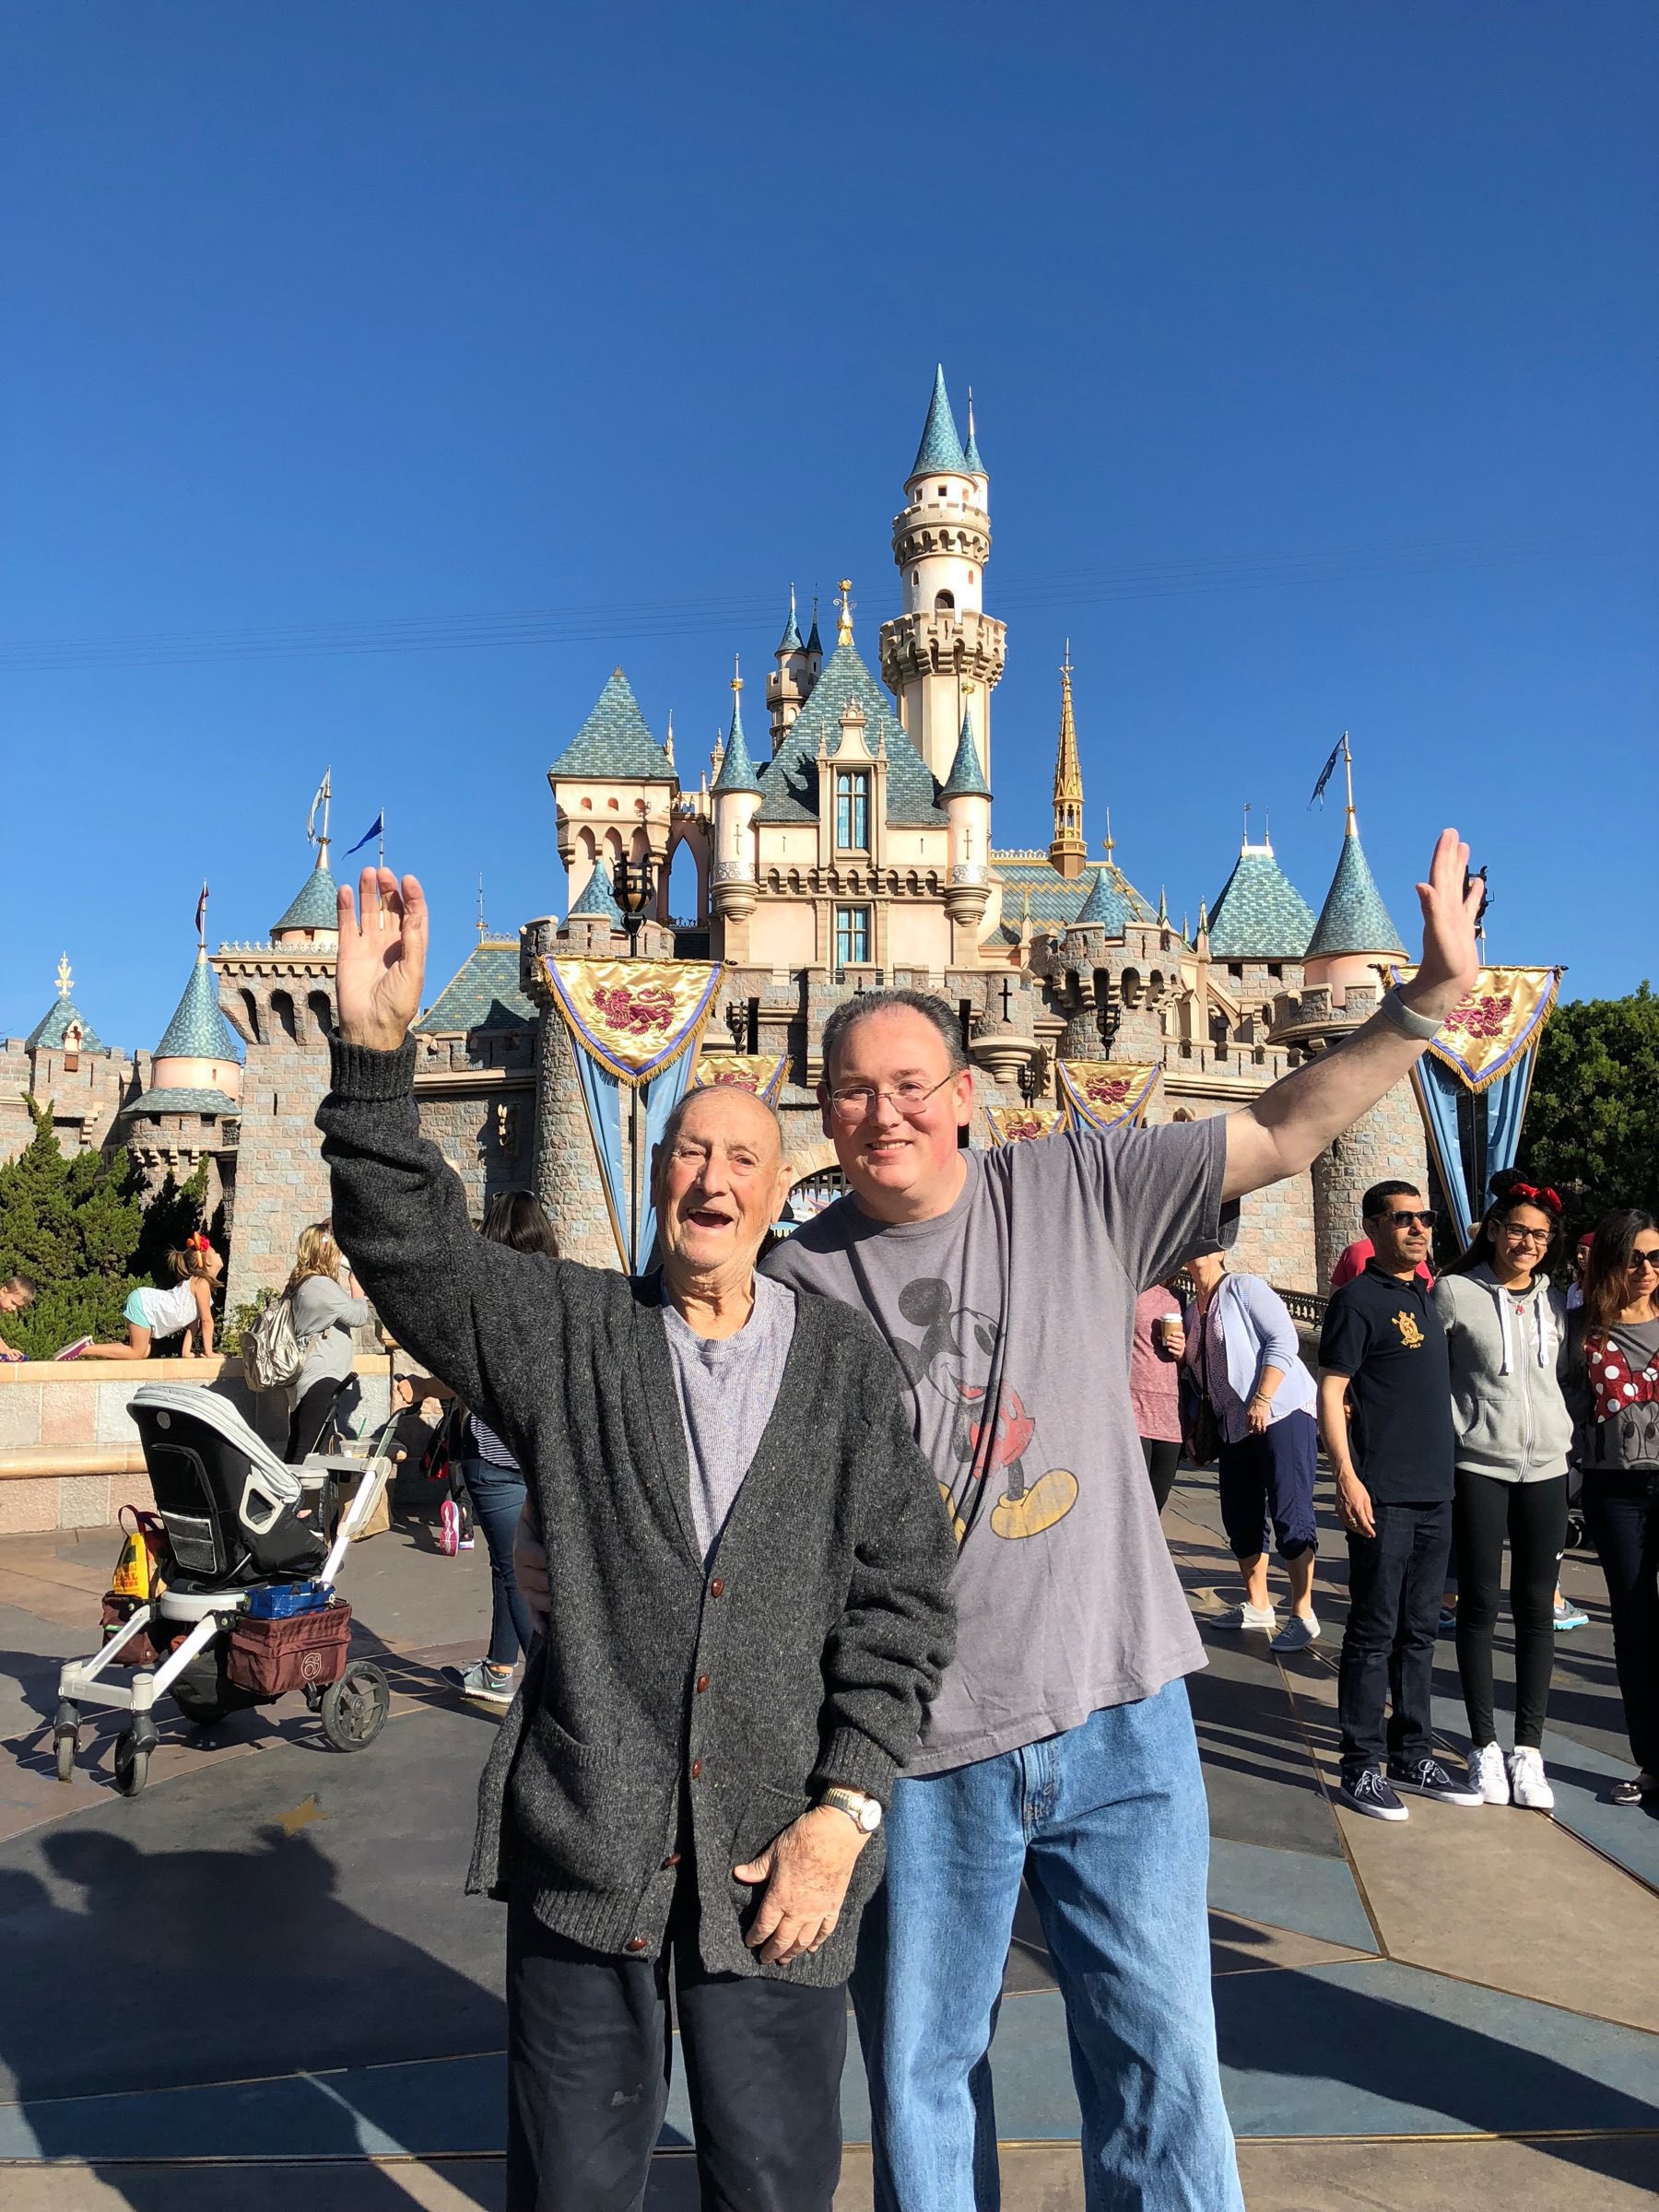 My Dad and I in front of Sleeping Beauty's Castle at Disneyland